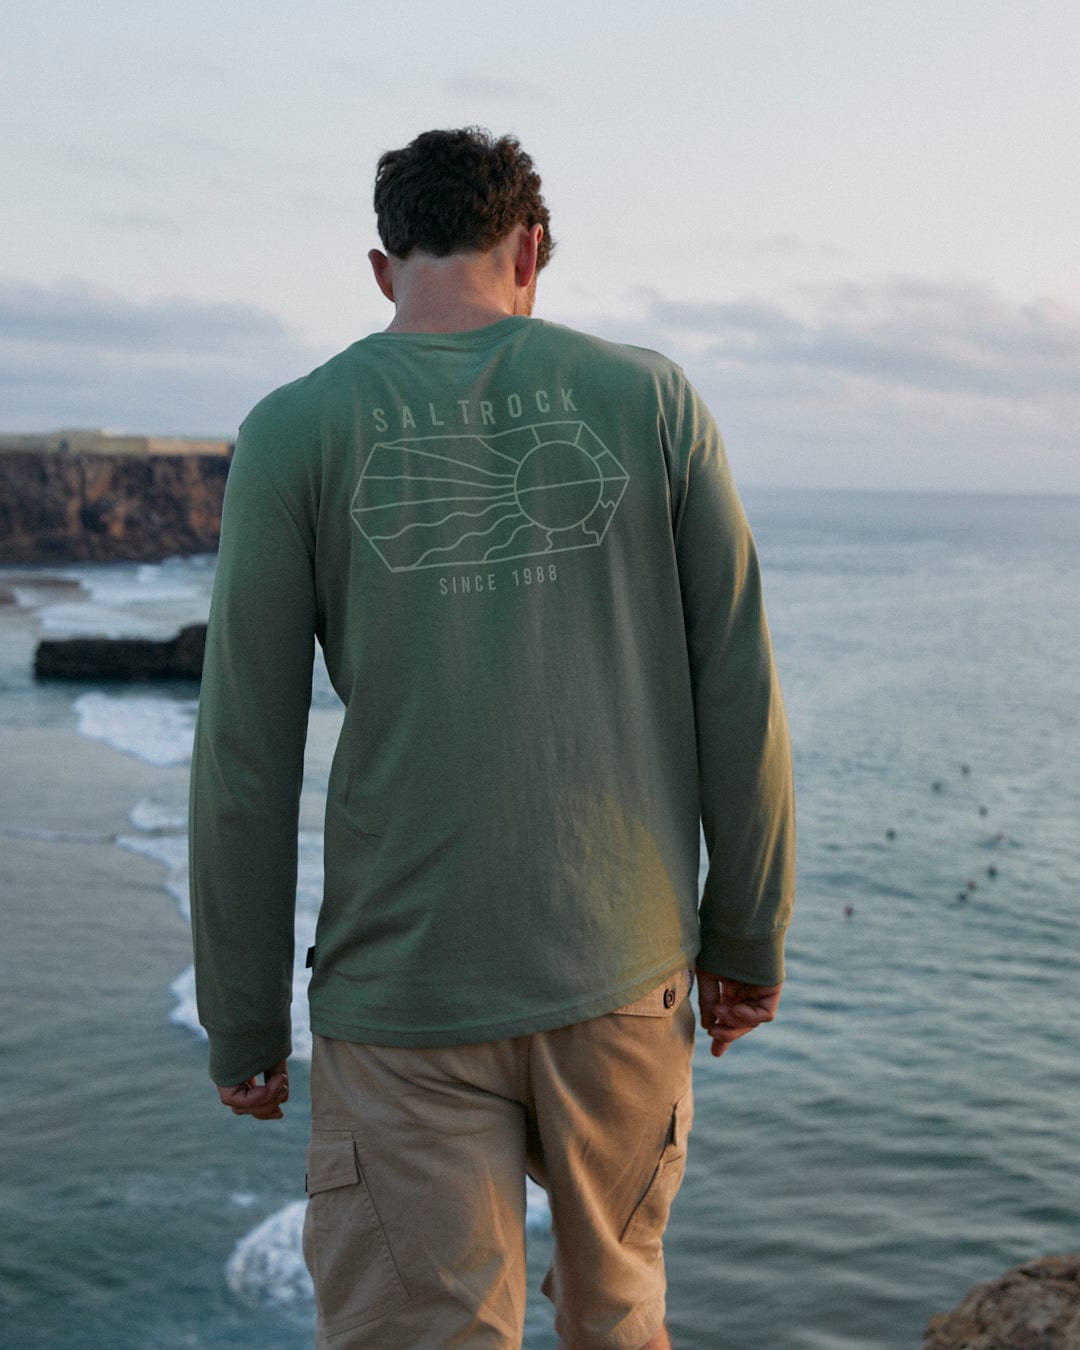 The back of a man standing on a cliff overlooking the ocean, wearing a Saltrock Vantage Outline - Mens Long Sleeve T-Shirt in Green.